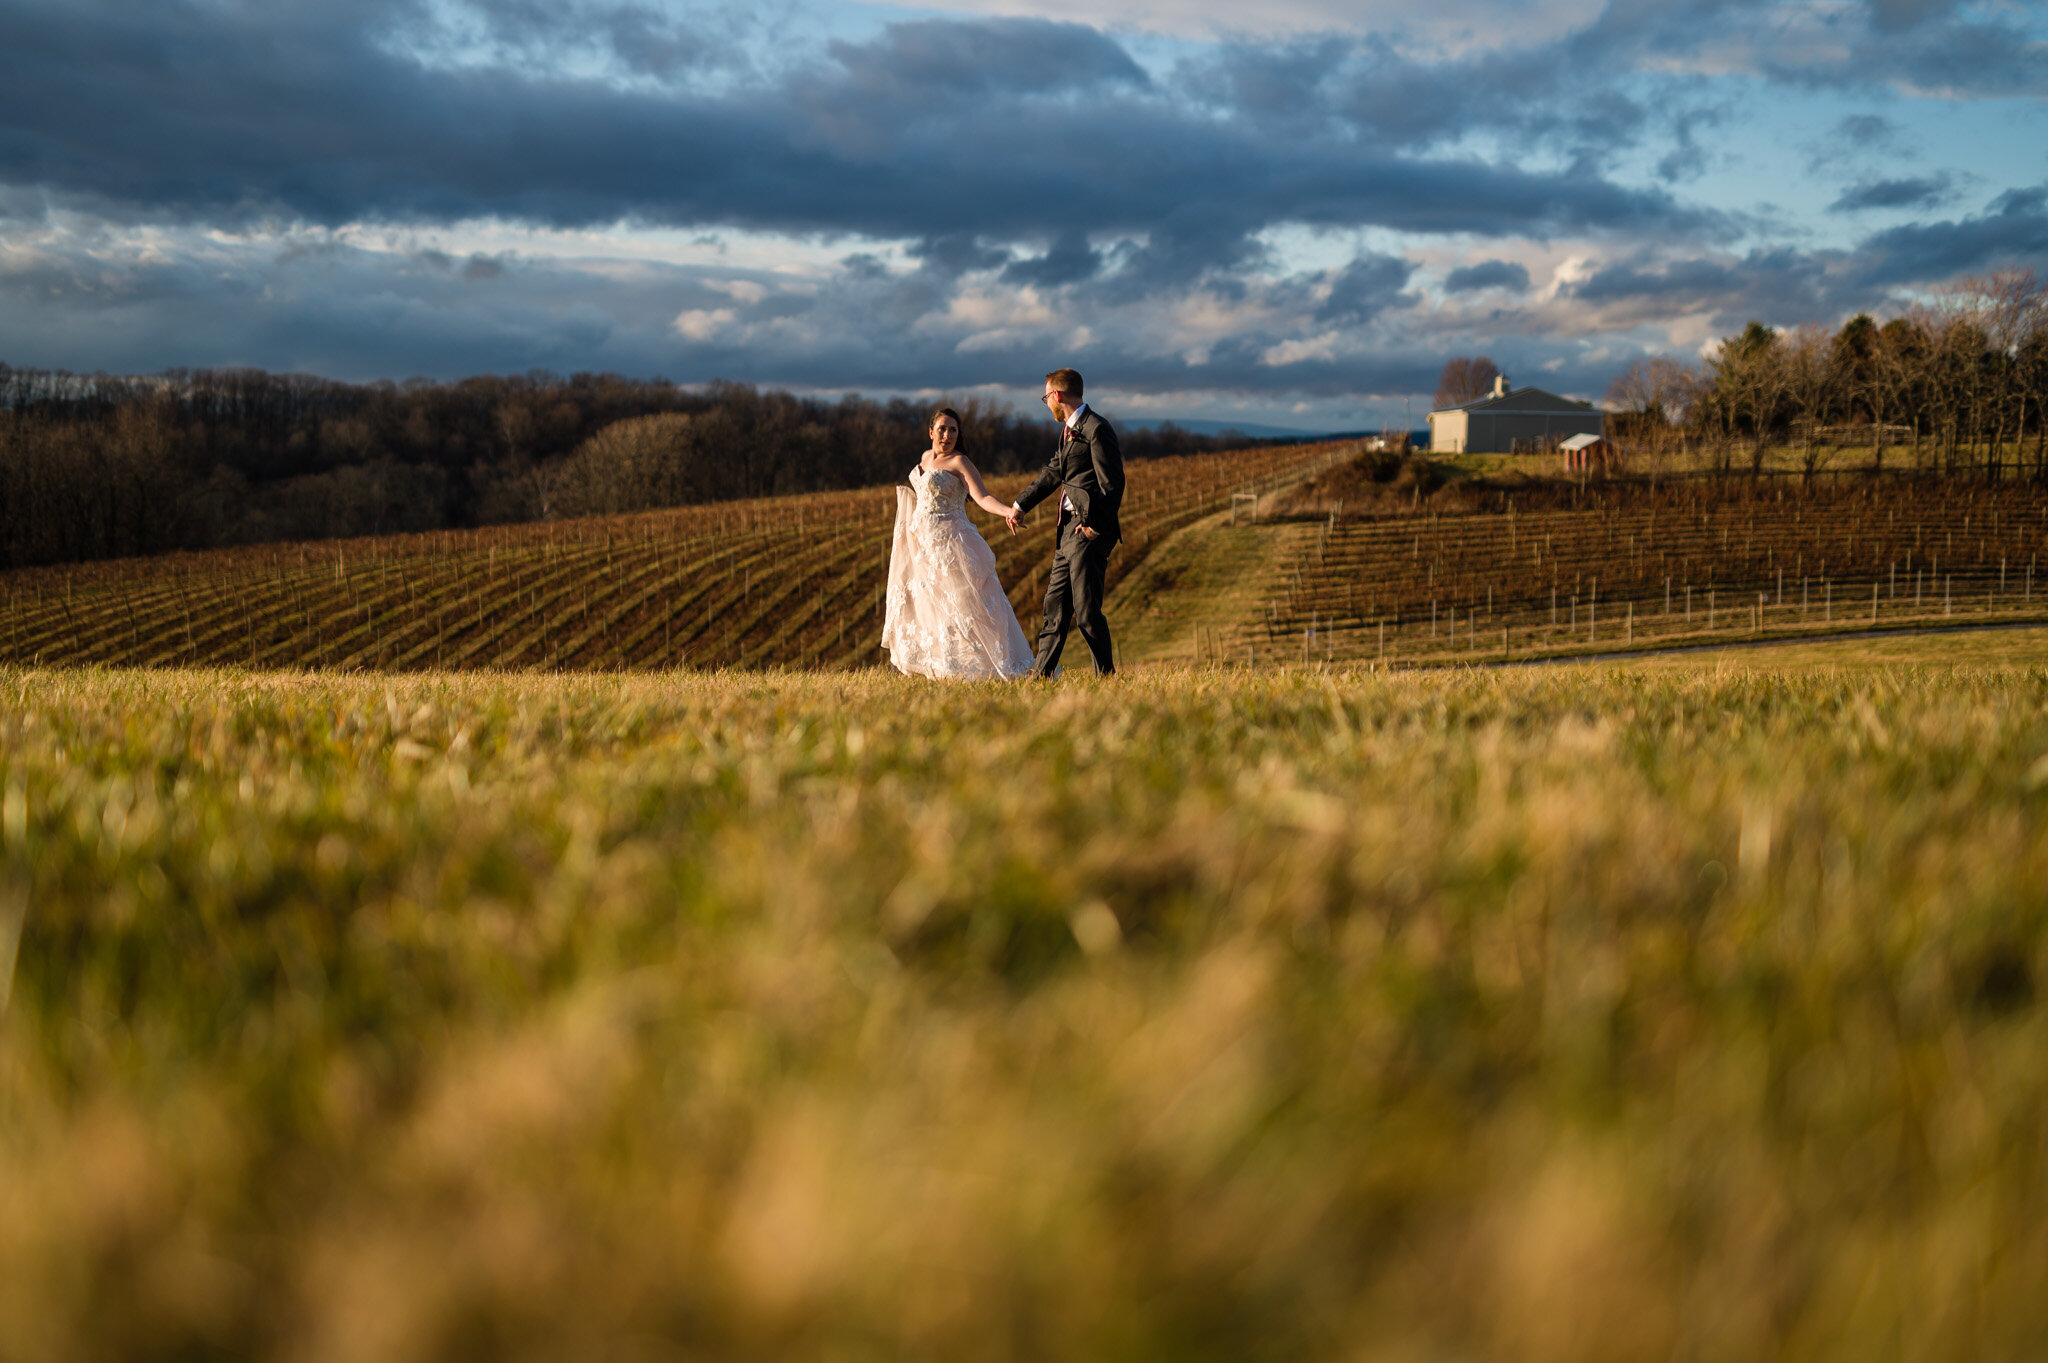 The bride and groom walking together through a field.